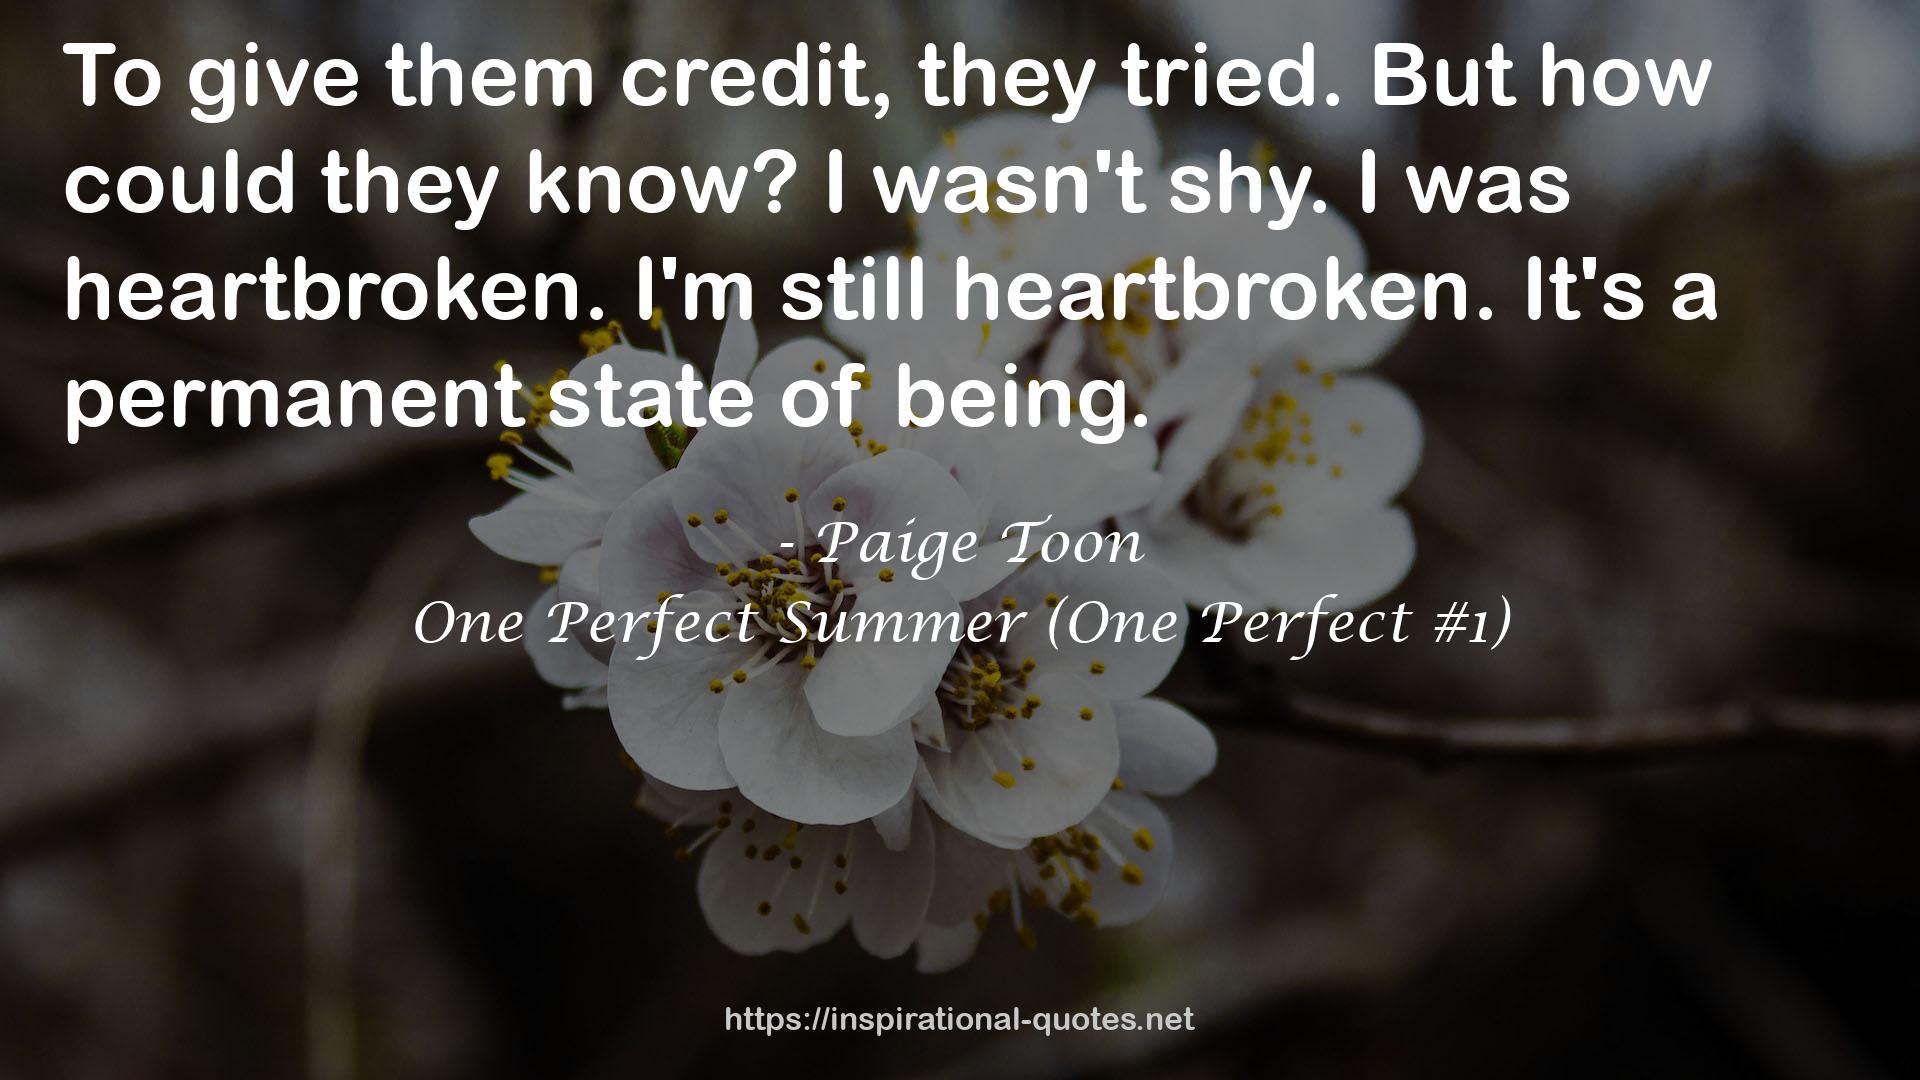 One Perfect Summer (One Perfect #1) QUOTES